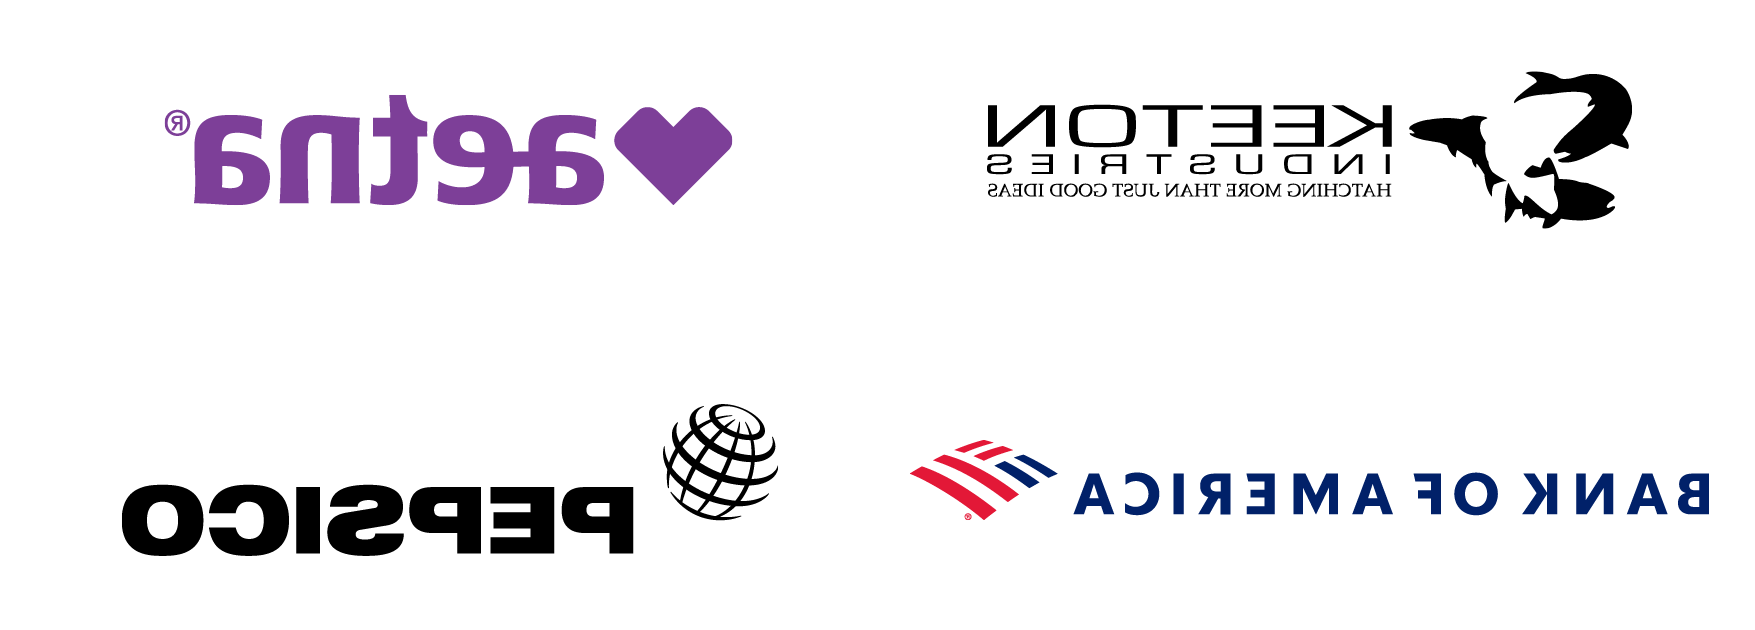 Logos of Information Systems career destinations: Keeton Industries, Aetna, Bank of America, and PepsiCo